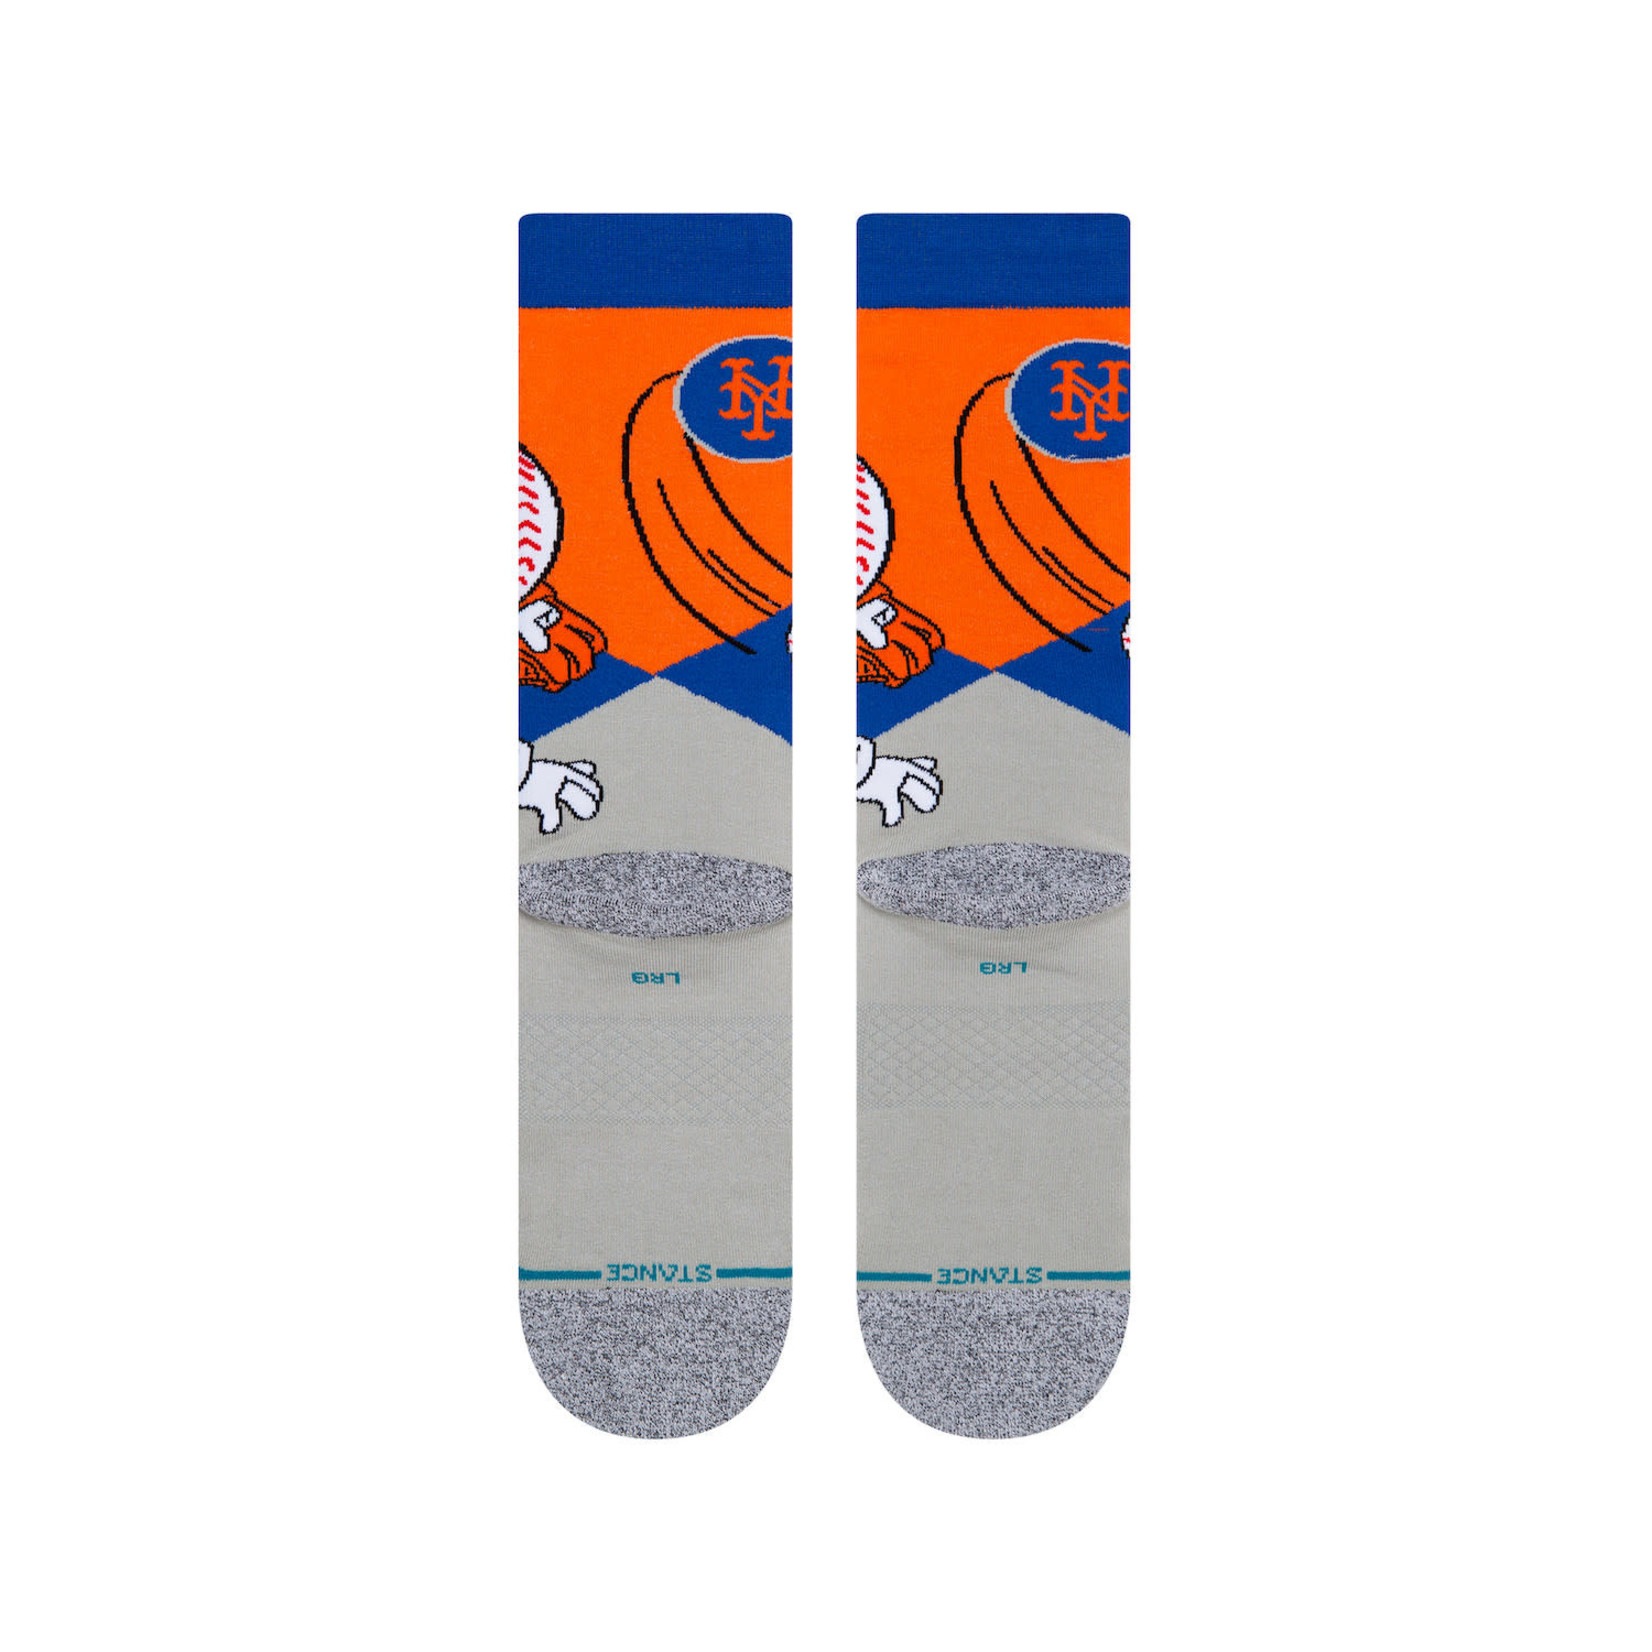 Stance Stance Mets Mascot YL (Kids 2-5.5)